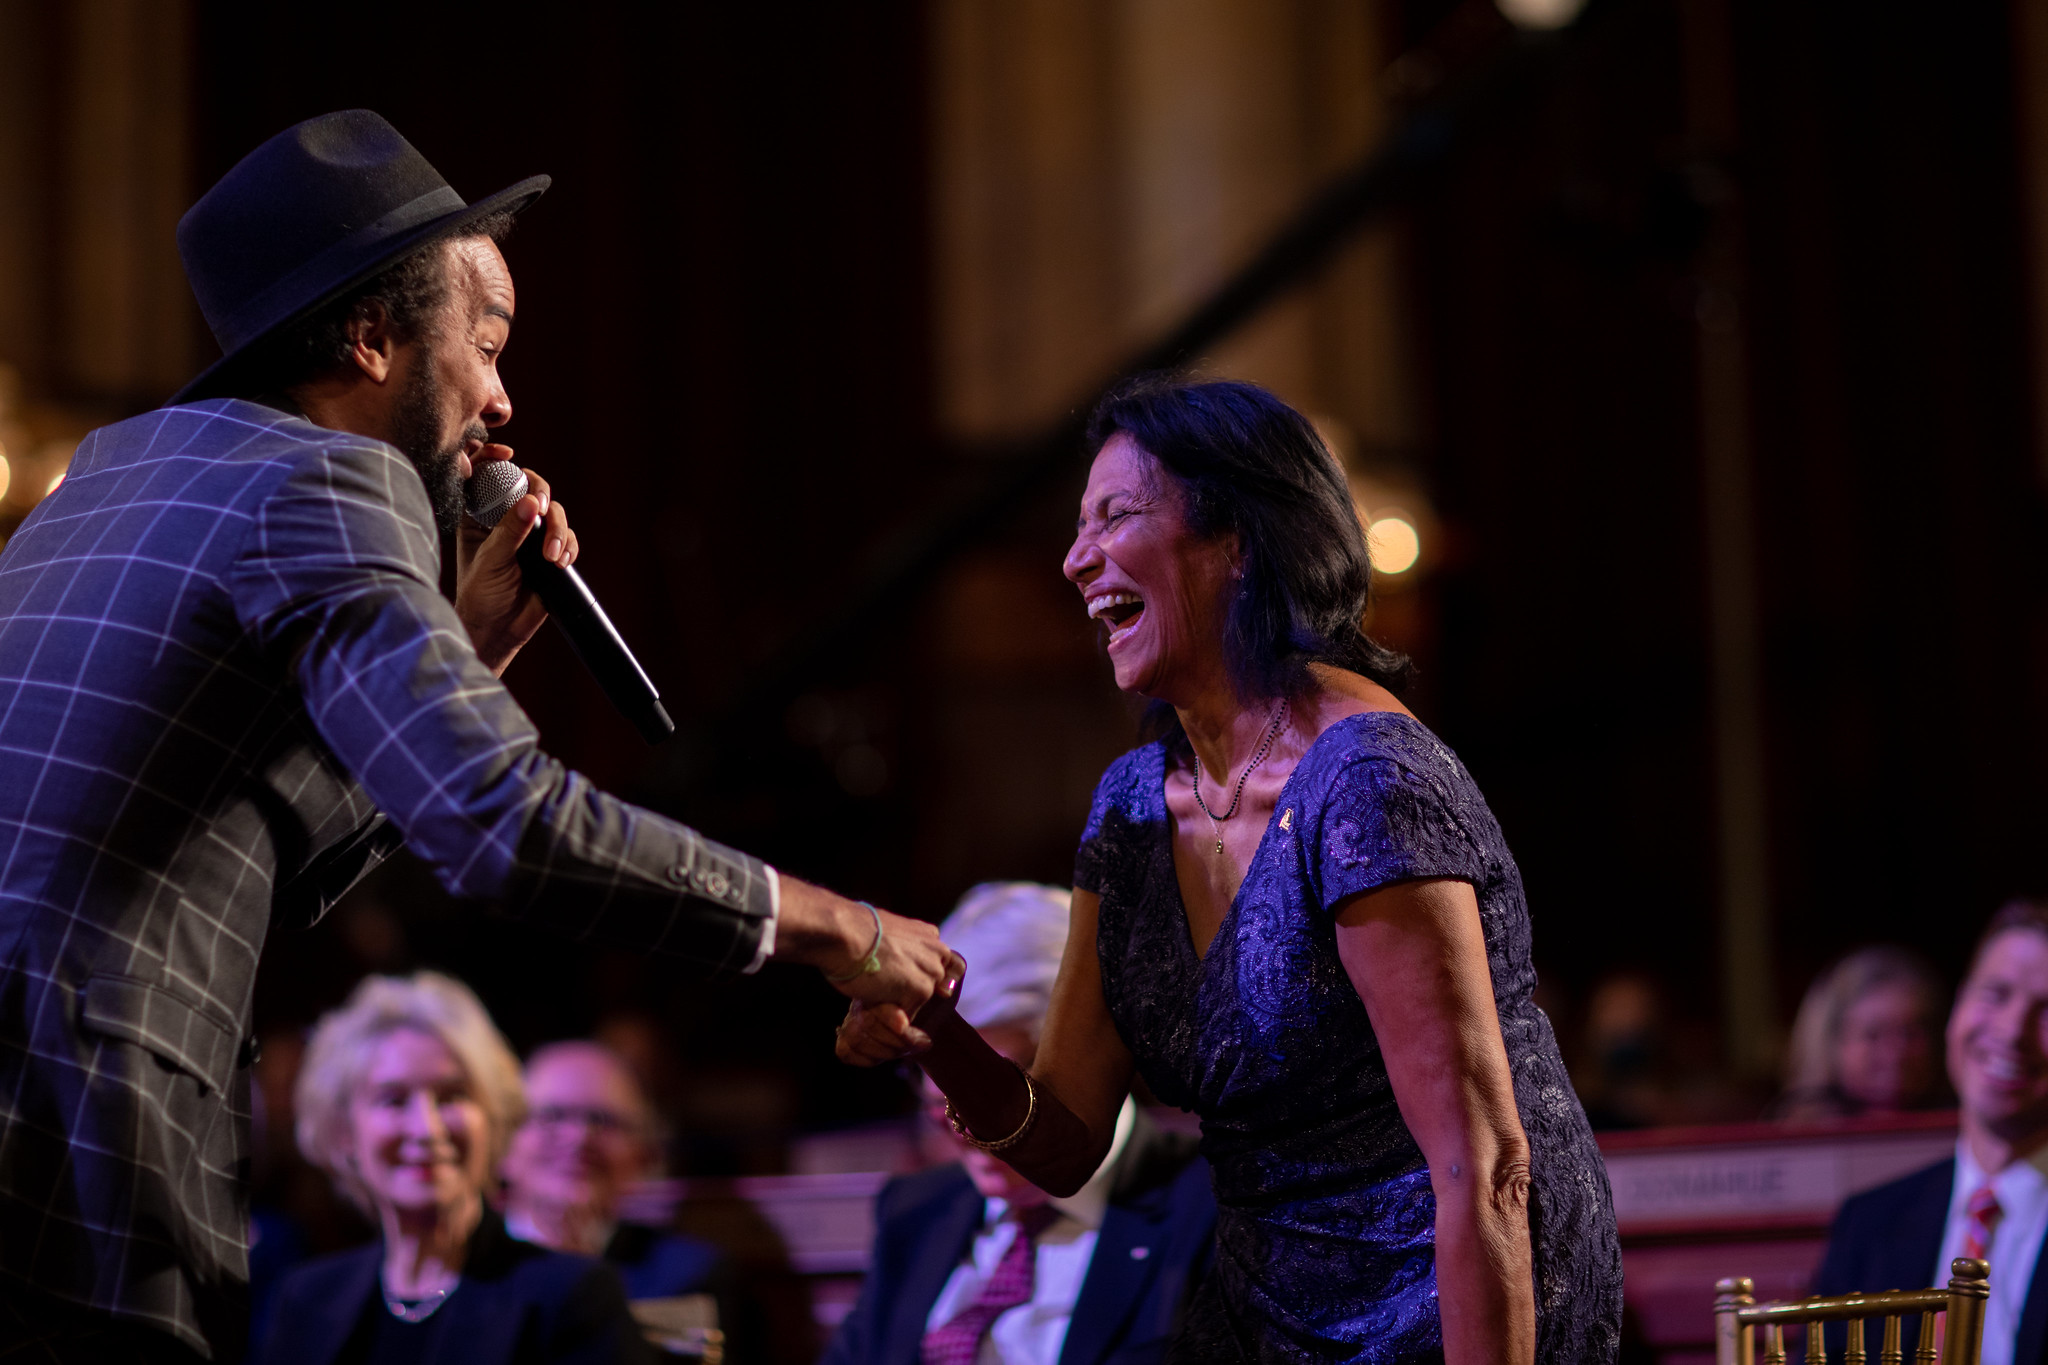 Kees Dieffenthaller, the lead singer of the Caribbean soca group KES from Thilsted’s home country of Trinidad and Tobago performed at the conclusion of the Laureate Award Ceremony. Photo by World Food Prize Foundation.